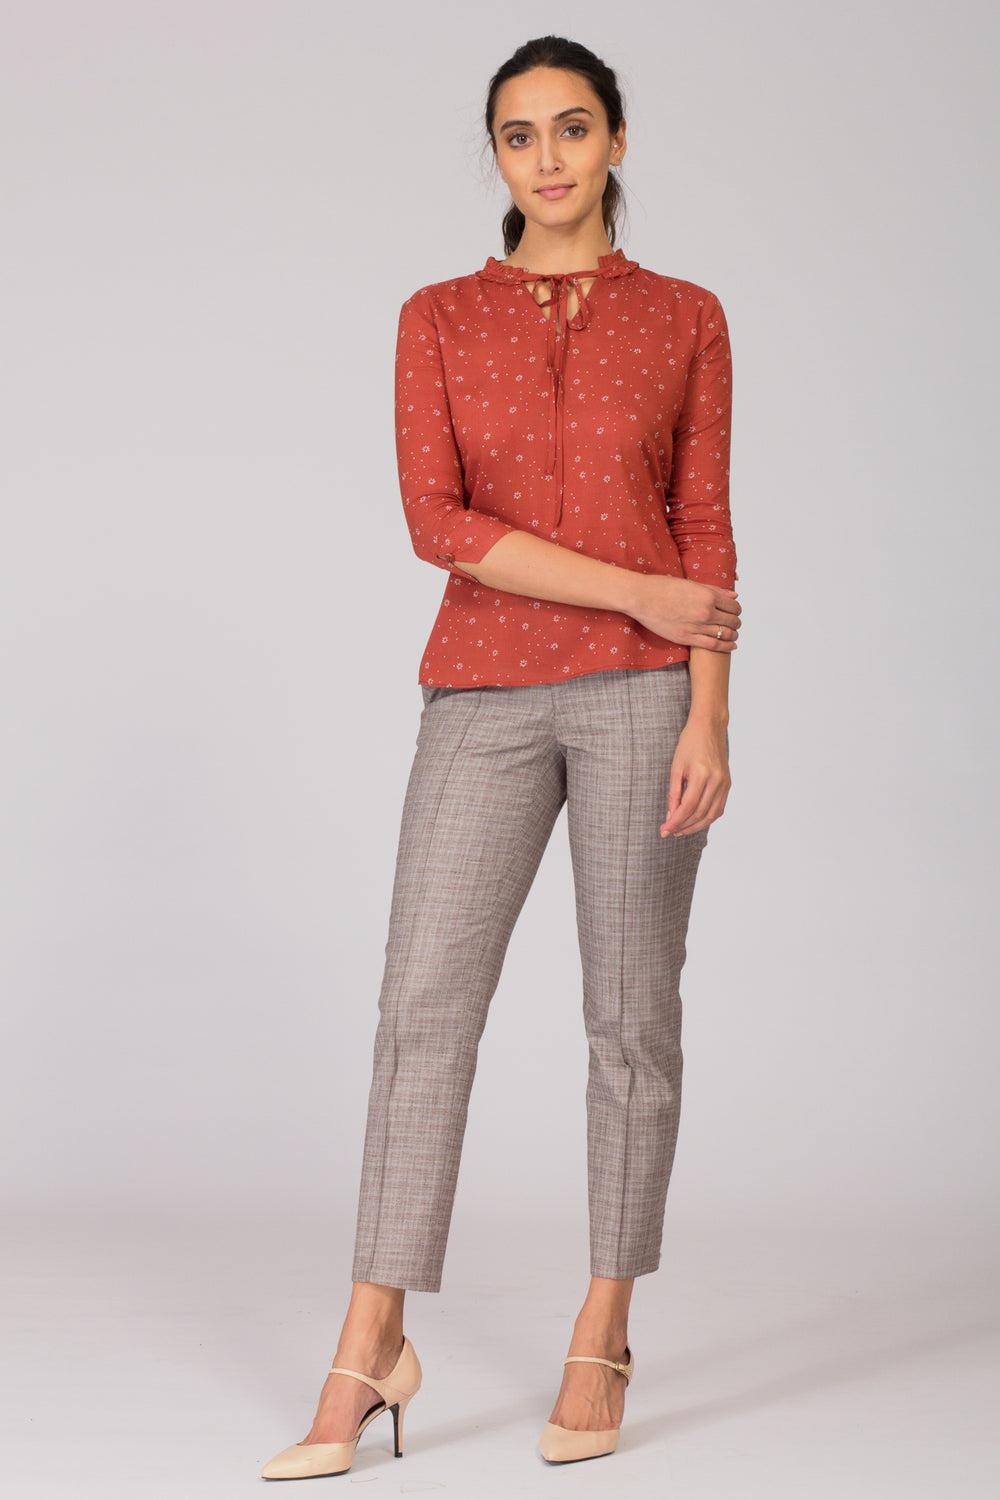 Smart Cotton women's formal pants and trousers for office. Shop online for culottes , trousers, and formal palazzo pants at www.intermod.in